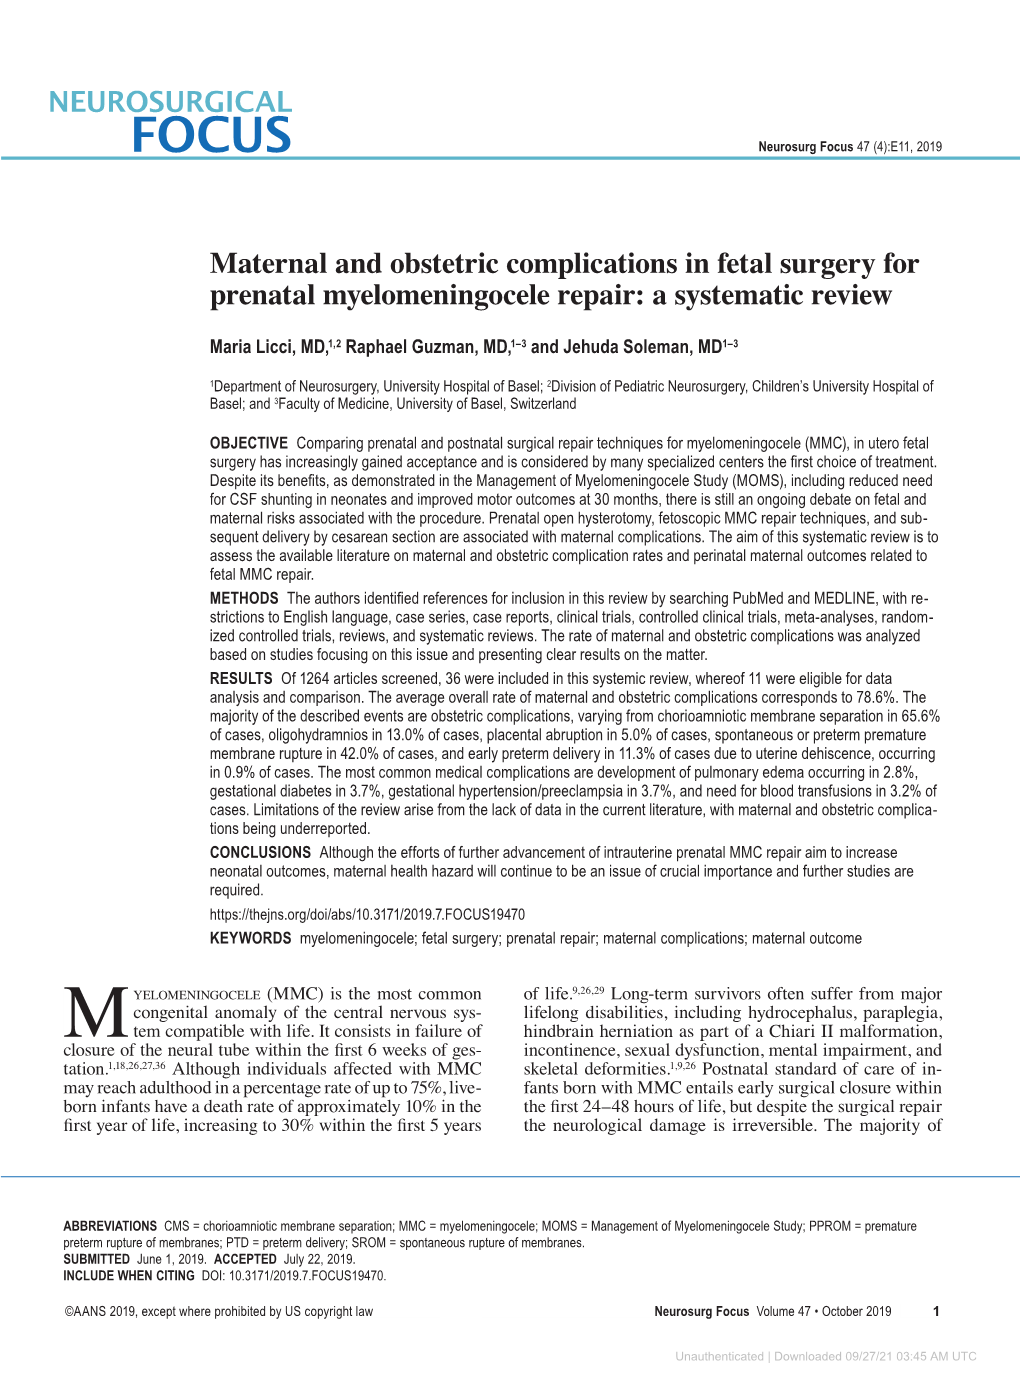 Maternal and Obstetric Complications in Fetal Surgery for Prenatal Myelomeningocele Repair: a Systematic Review